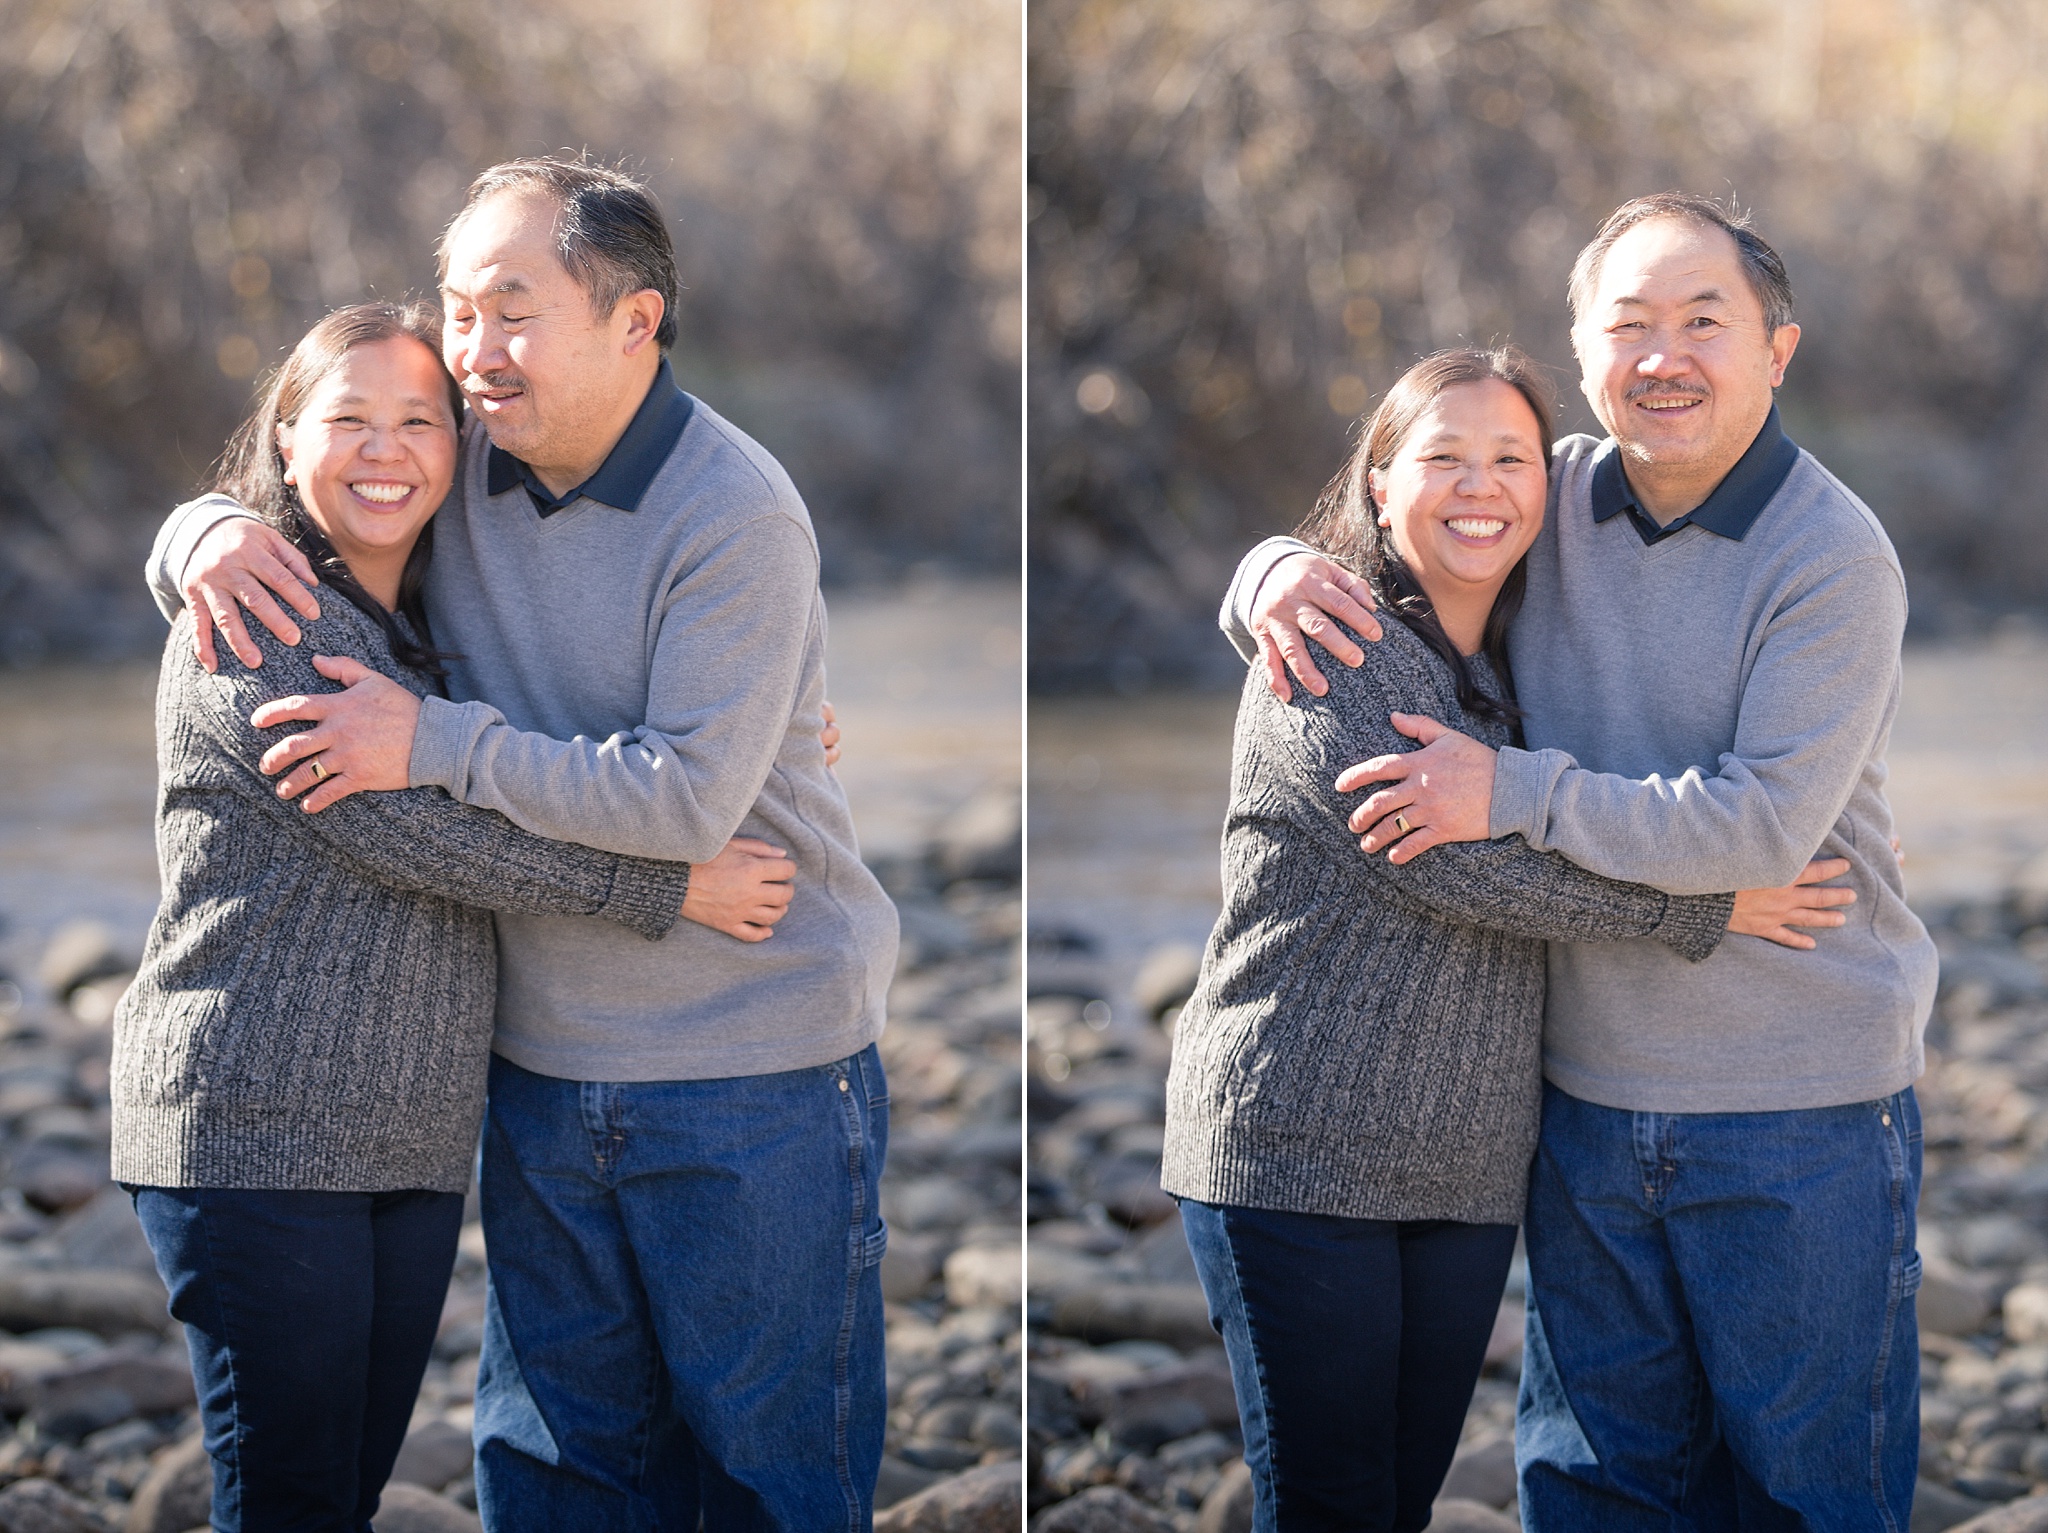 Parents hugging during an extended family session. The Lee & Lor’s Family Photo Session at Clear Creek History Park by Colorado Family Photographer, Jennifer Garza. Colorado Family Photography, Colorado Family Photographer, Clear Creek History Park Family Photographer, Clear Creek History Park Family Photography, Clear Creek History Park, Golden History Park Family Photographer, Golden Family Photographer, Golden Family Photography, Golden History Park, Denver Family Photos